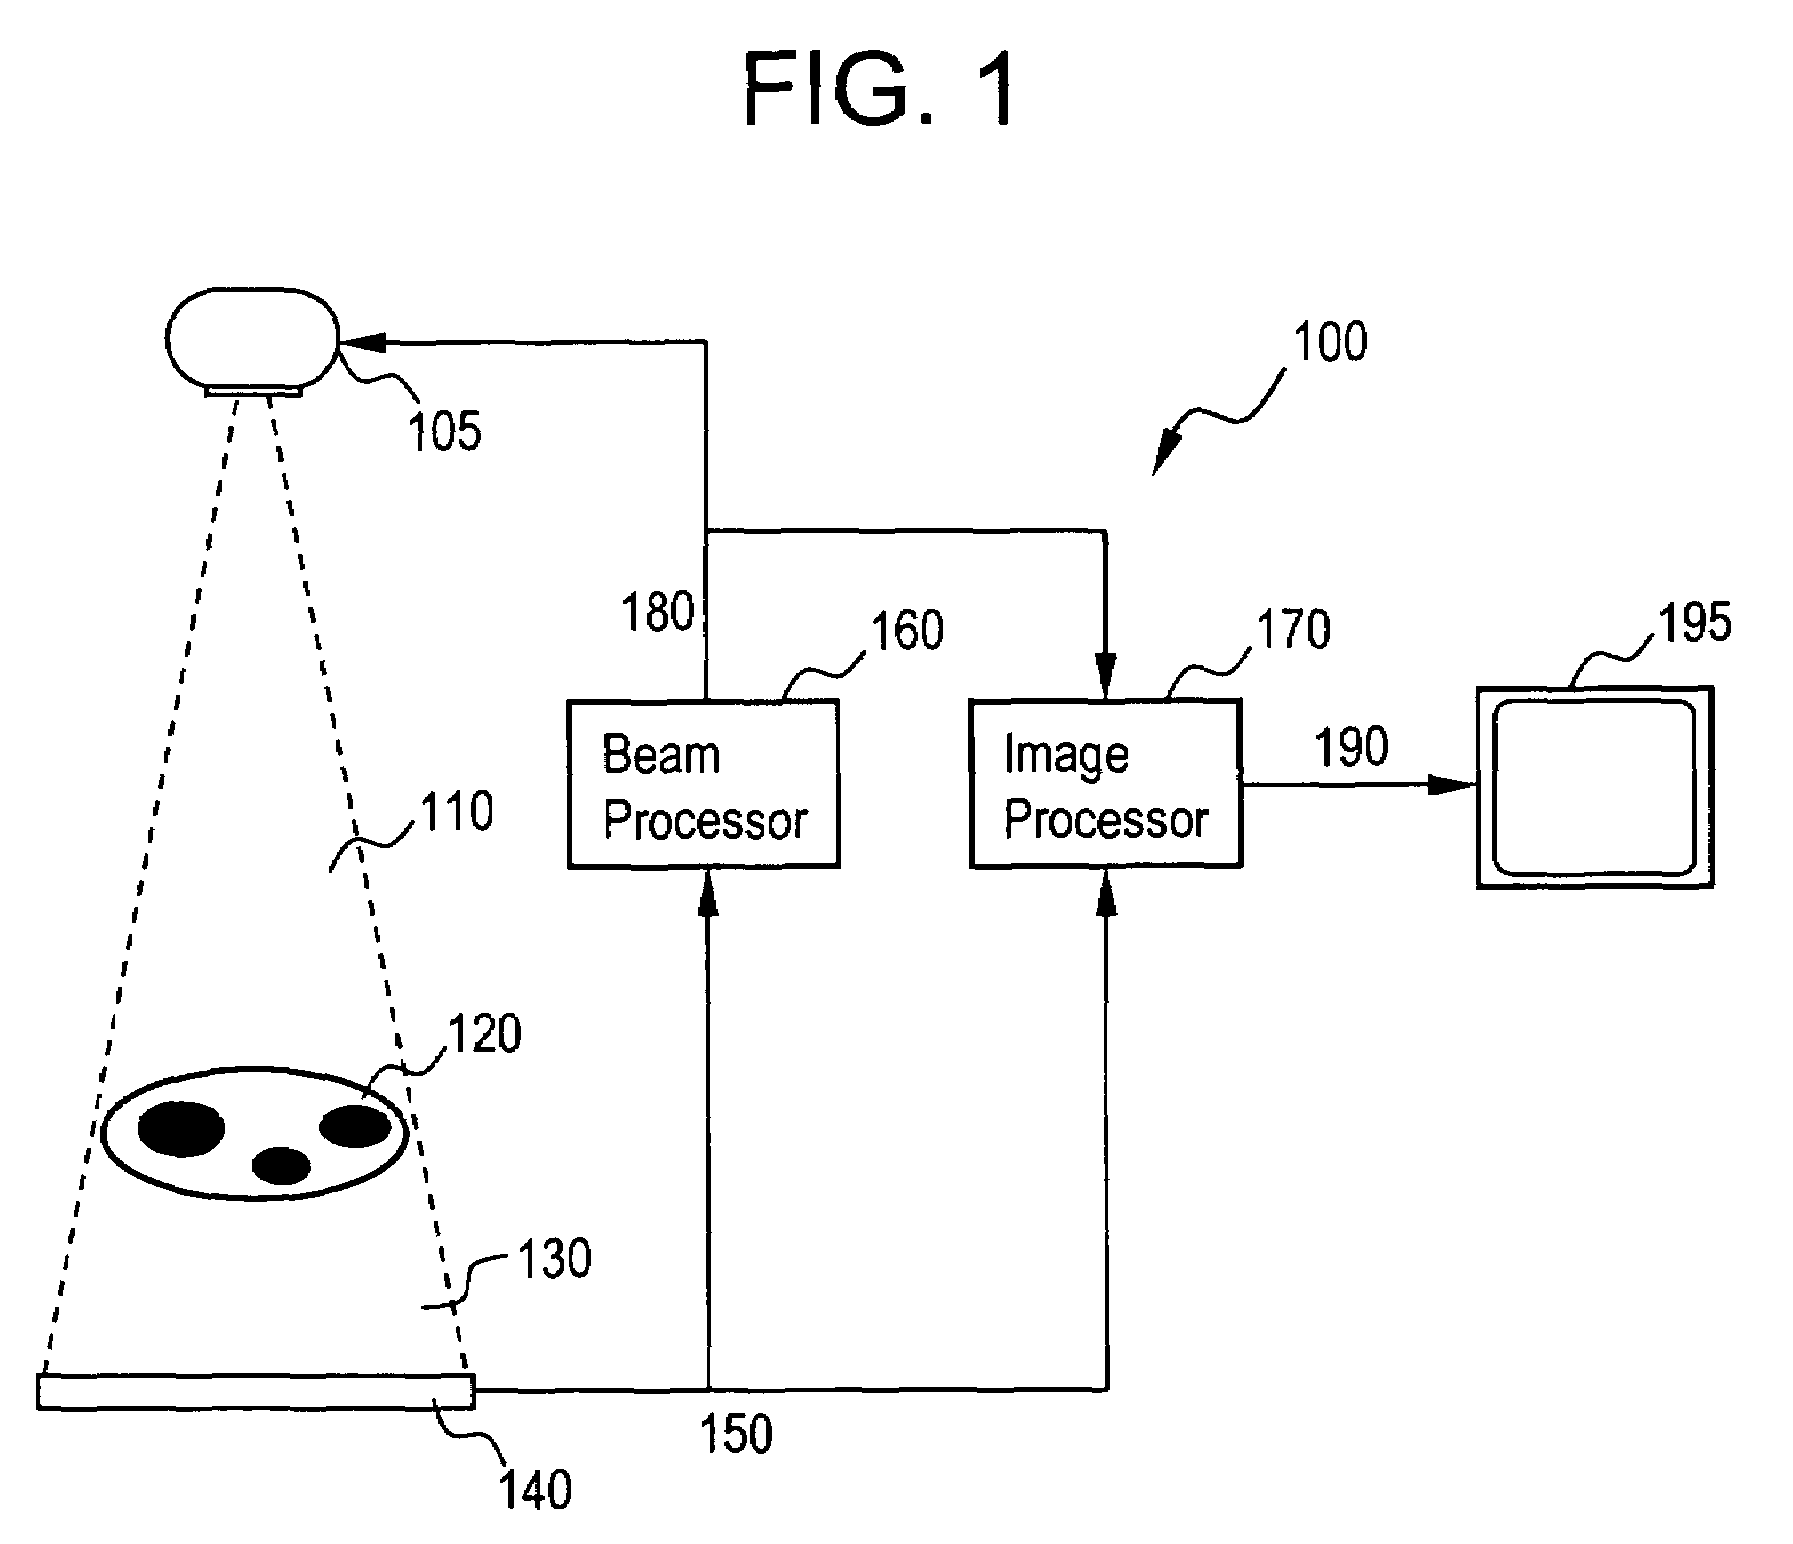 System and method for an adaptive morphology x-ray beam in an x-ray system